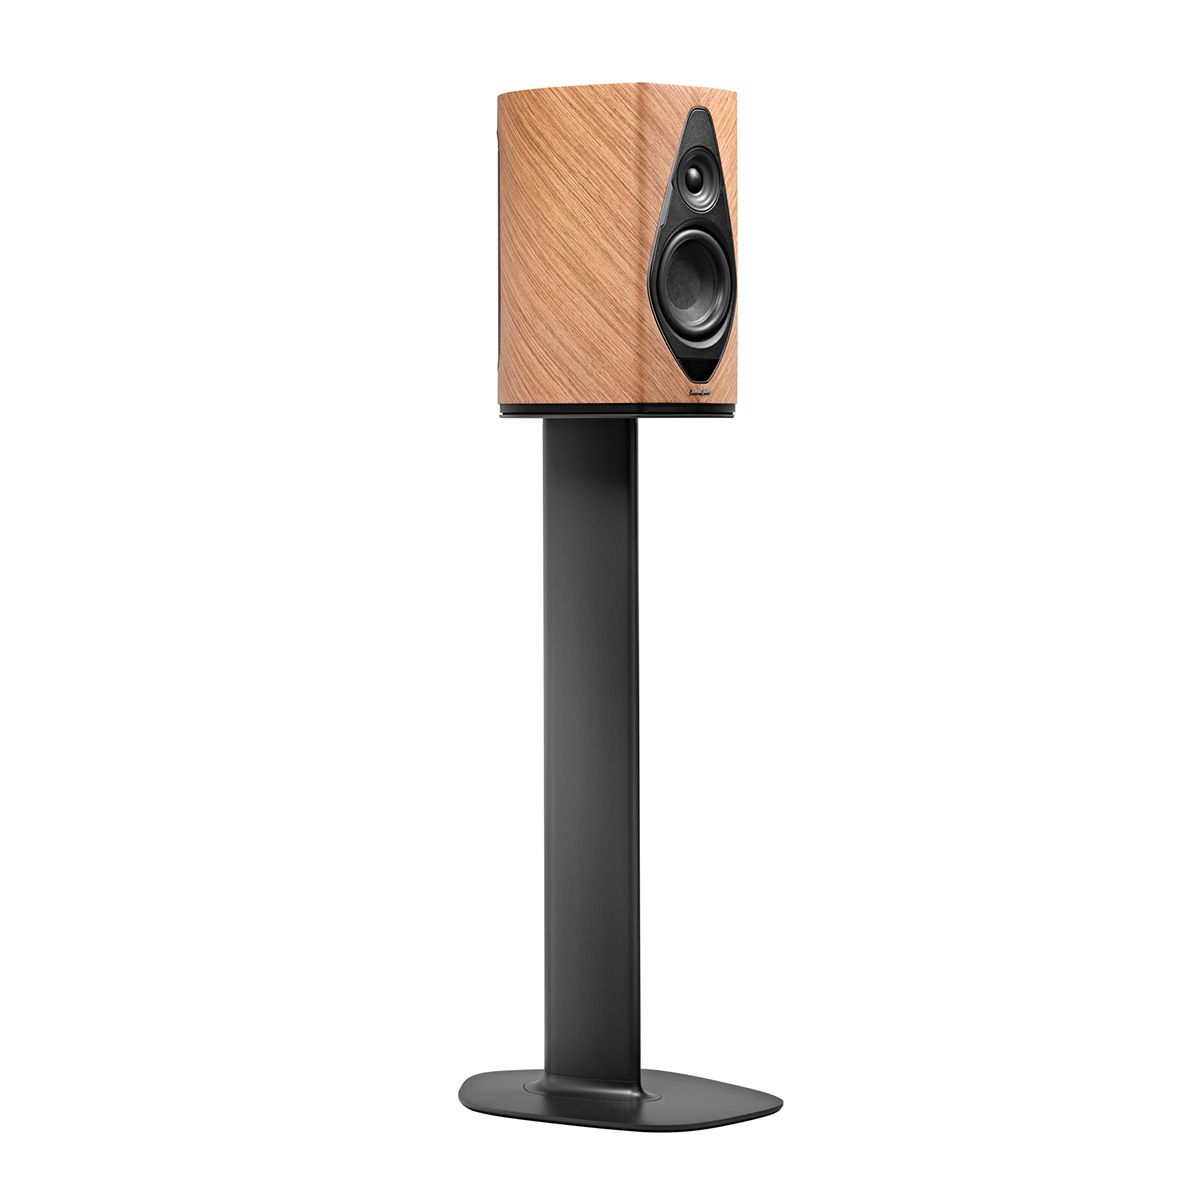 Sonus Faber Duetto Wireless Speaker System angled front view without grille on stand